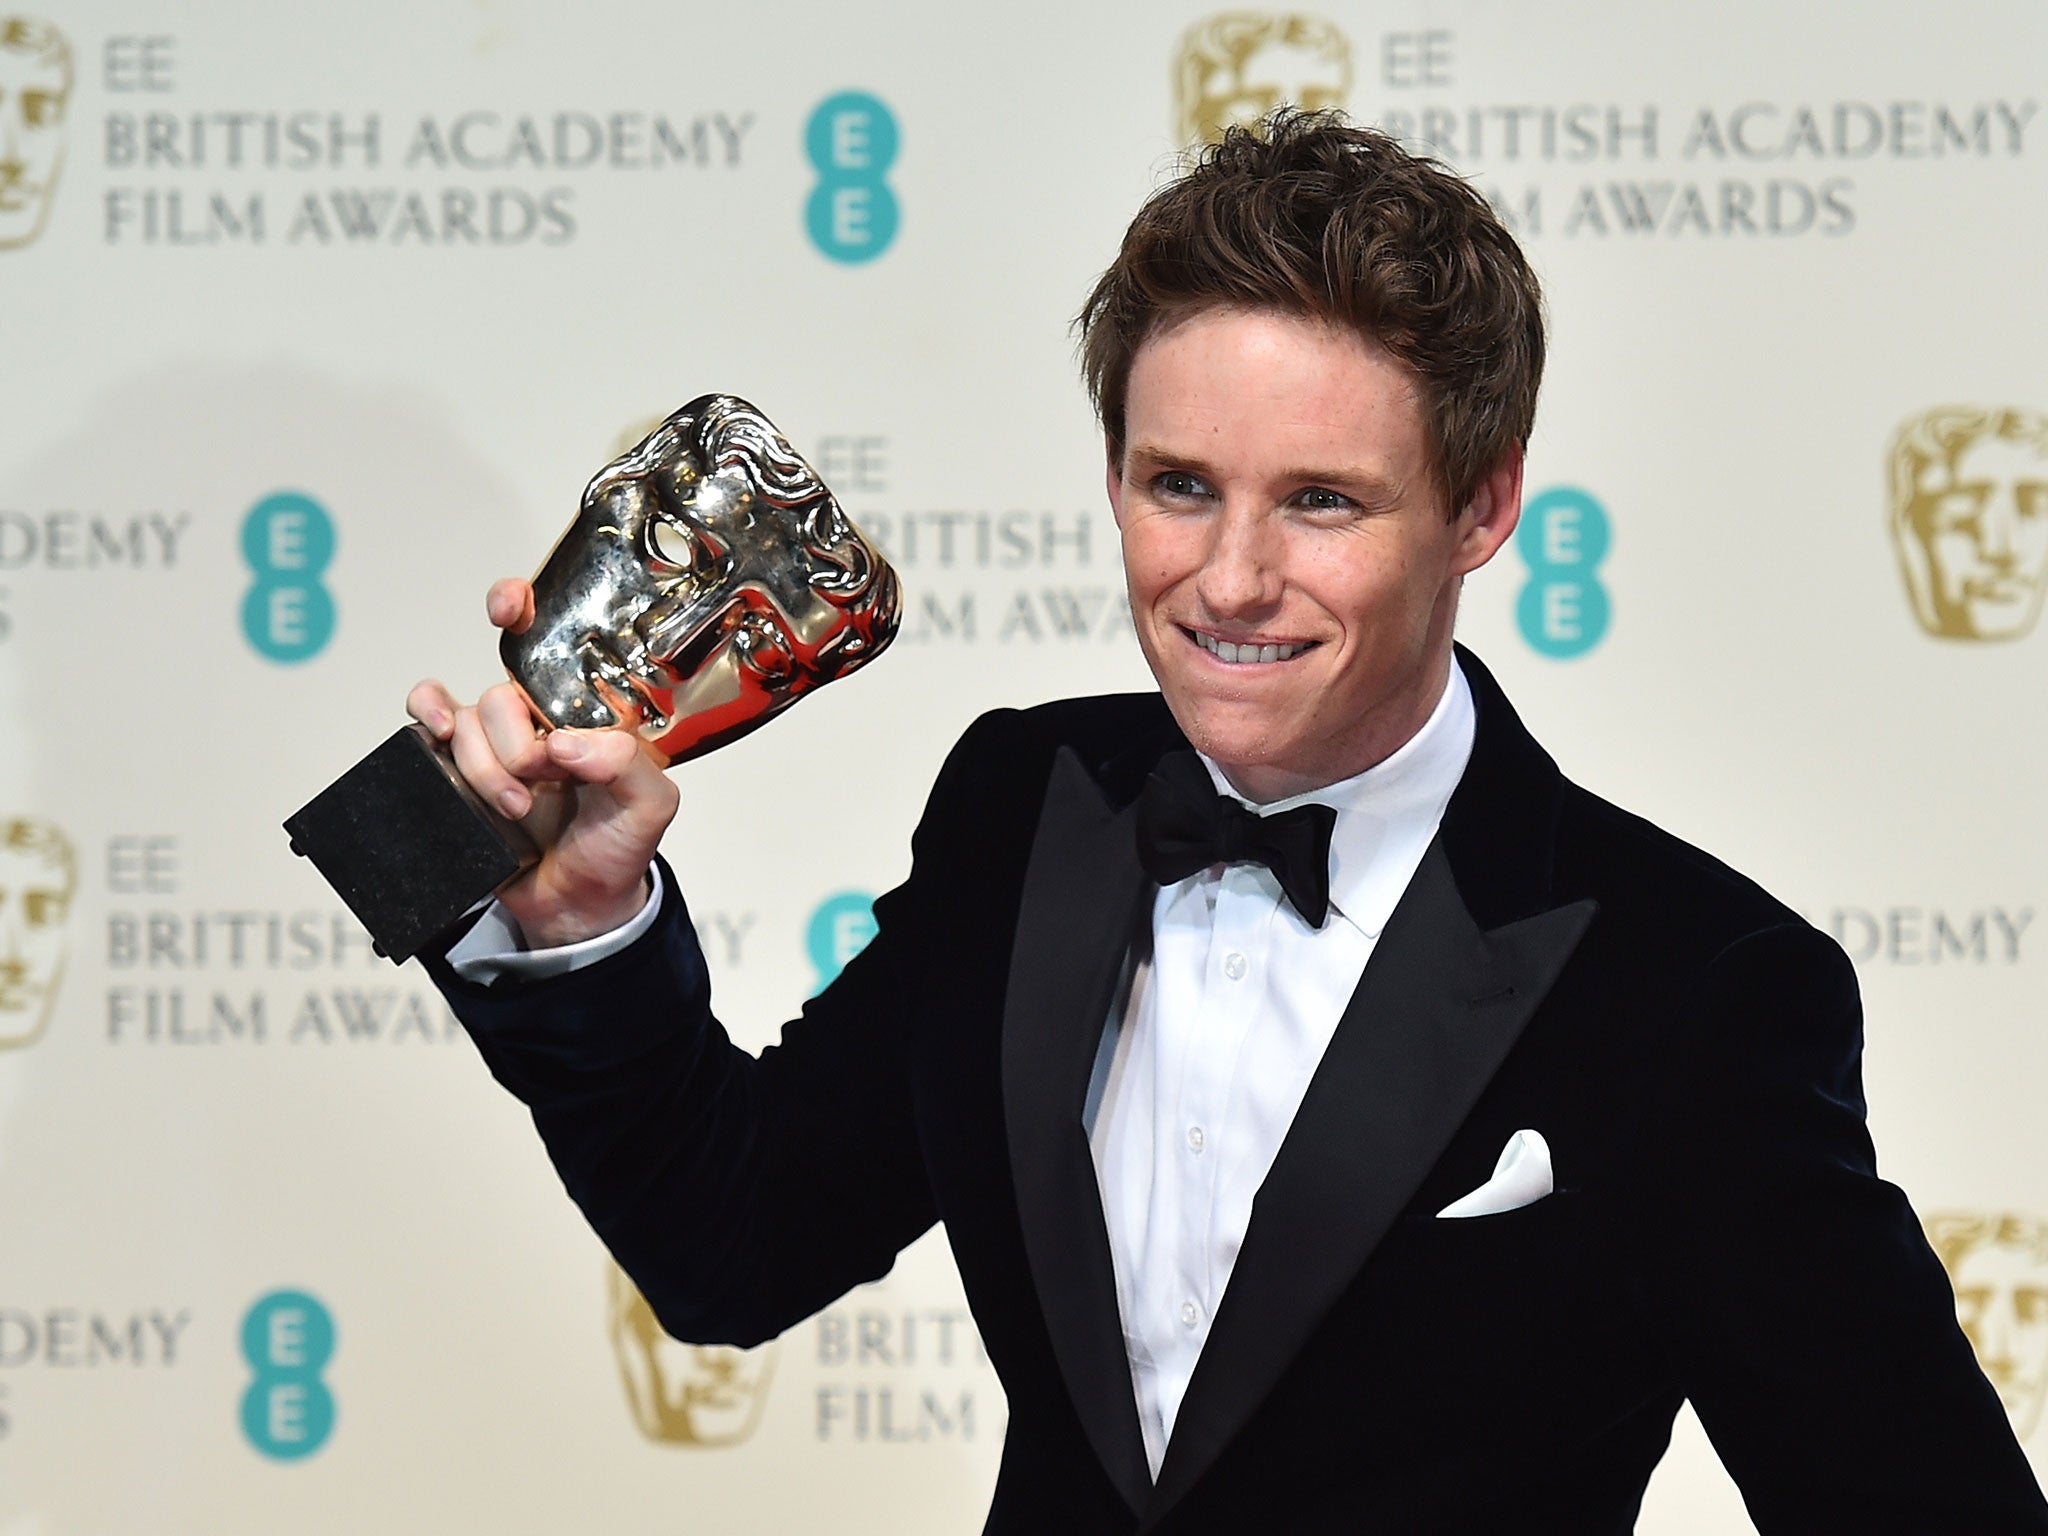 British actor Eddie Redmayne poses with the award for a leading actor for his work on the film 'The Theory of Everything' at the BAFTA British Academy Film Awards at the Royal Opera House